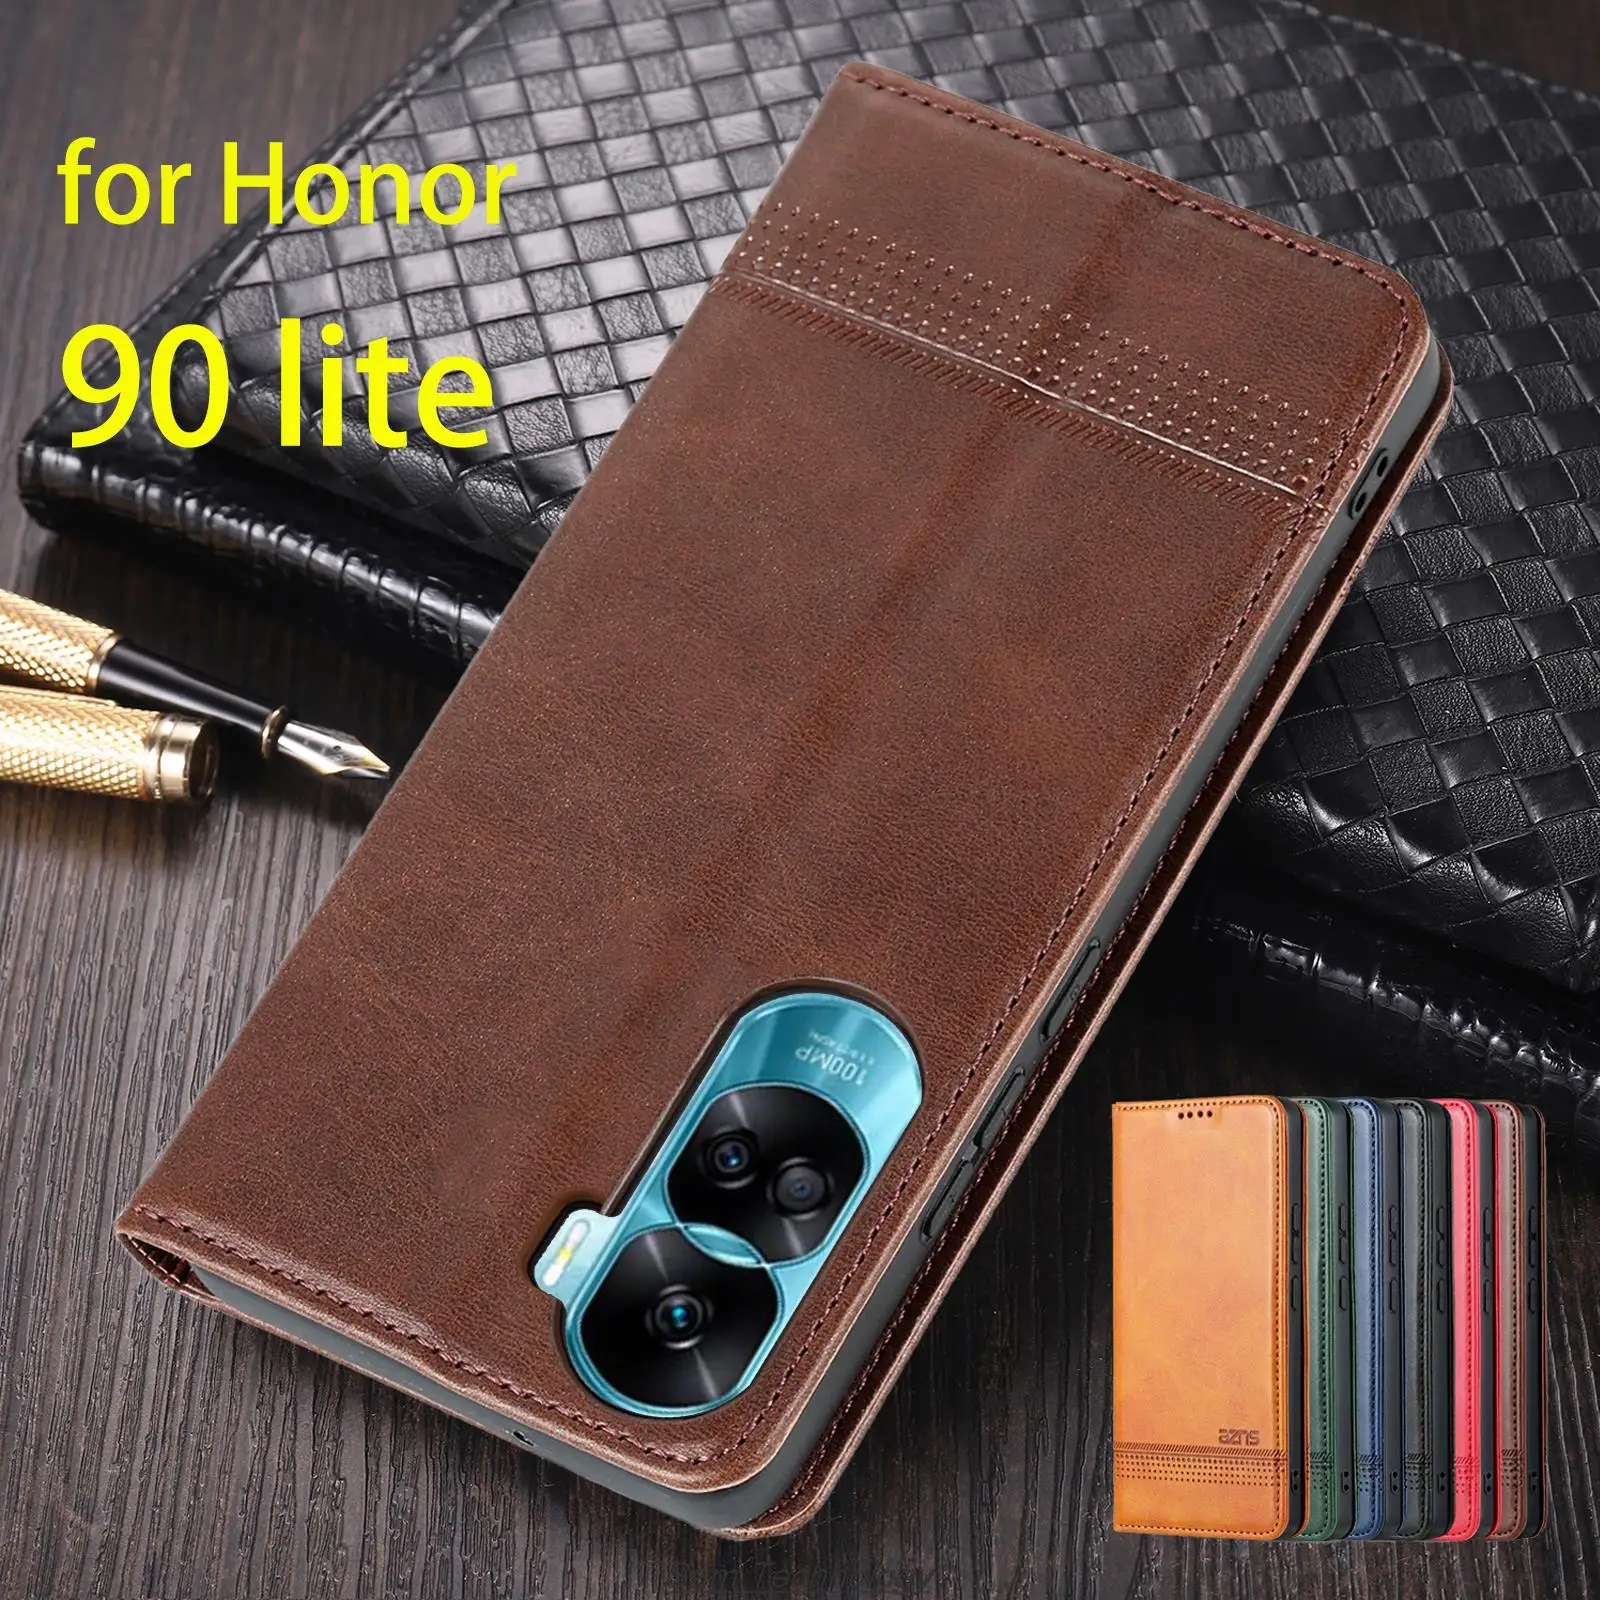 

Deluxe Magnetic Adsorption Leather Fitted Case for Huawei Honor 90 lite Flip Cover Protective Case Capa Fundas Coque